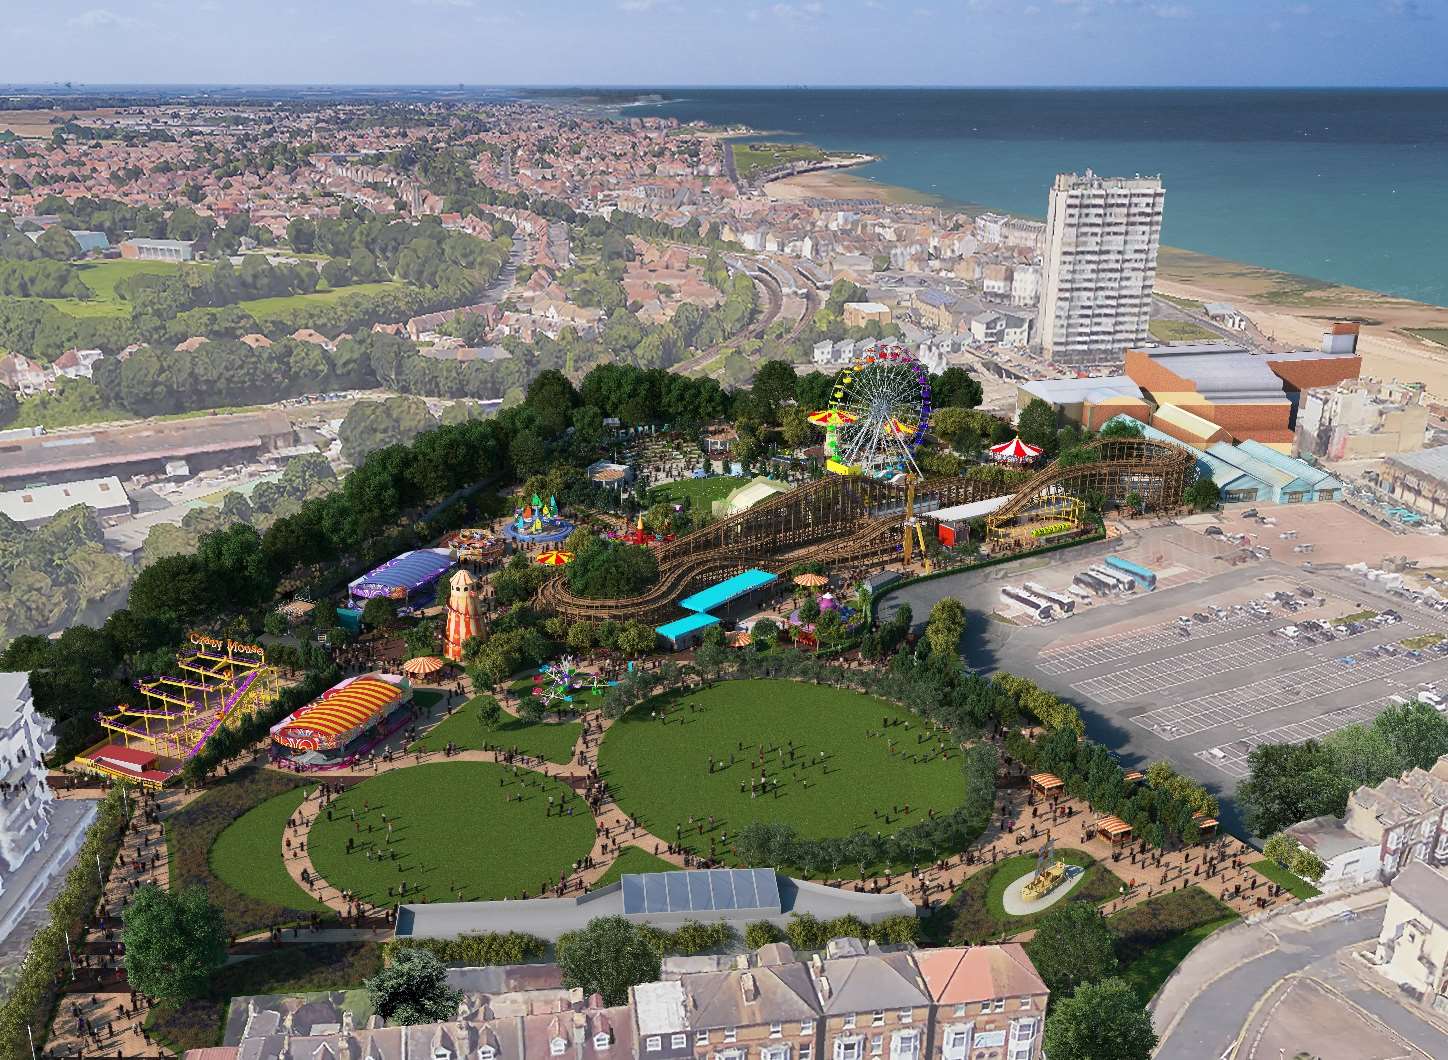 Dreamland in Margate will open to the public this weekend